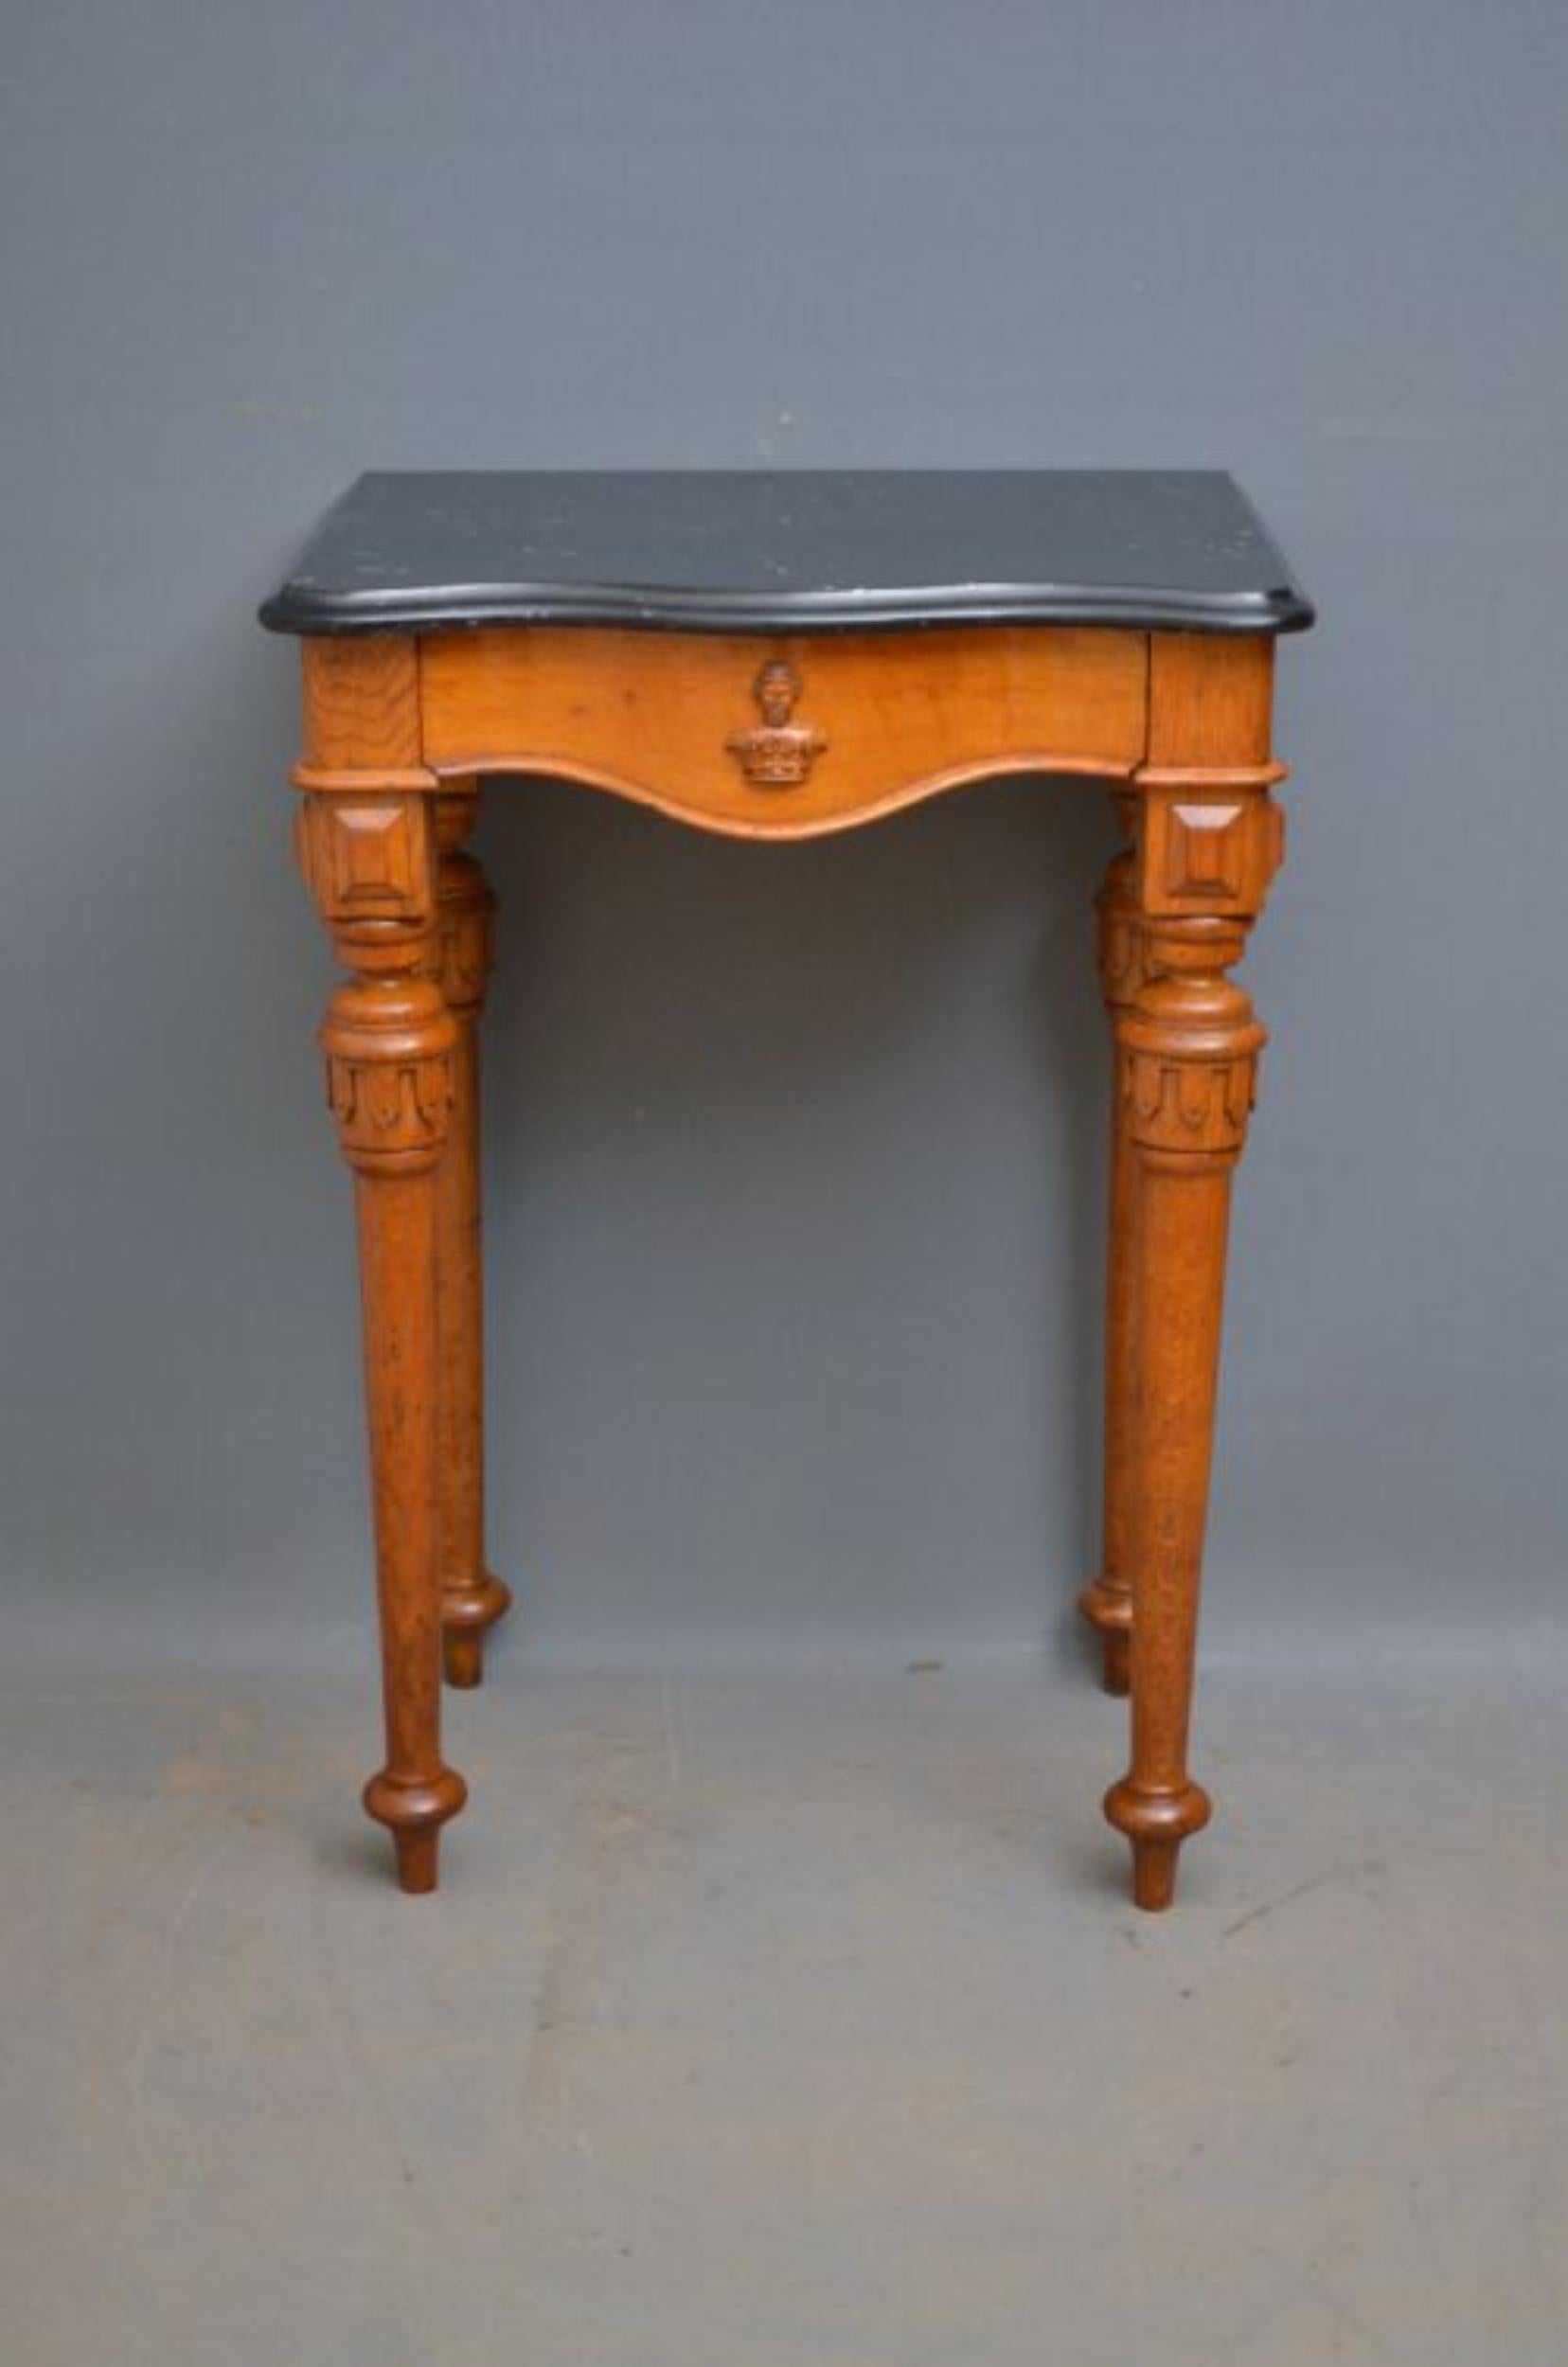 J00 Victorian, Gothic Revival oak hall table, having serpentine black veined marble top above frieze drawer, all standing on turned and carved tapered legs. This antique hall table is ready to place at home c1870
Measures: H 36